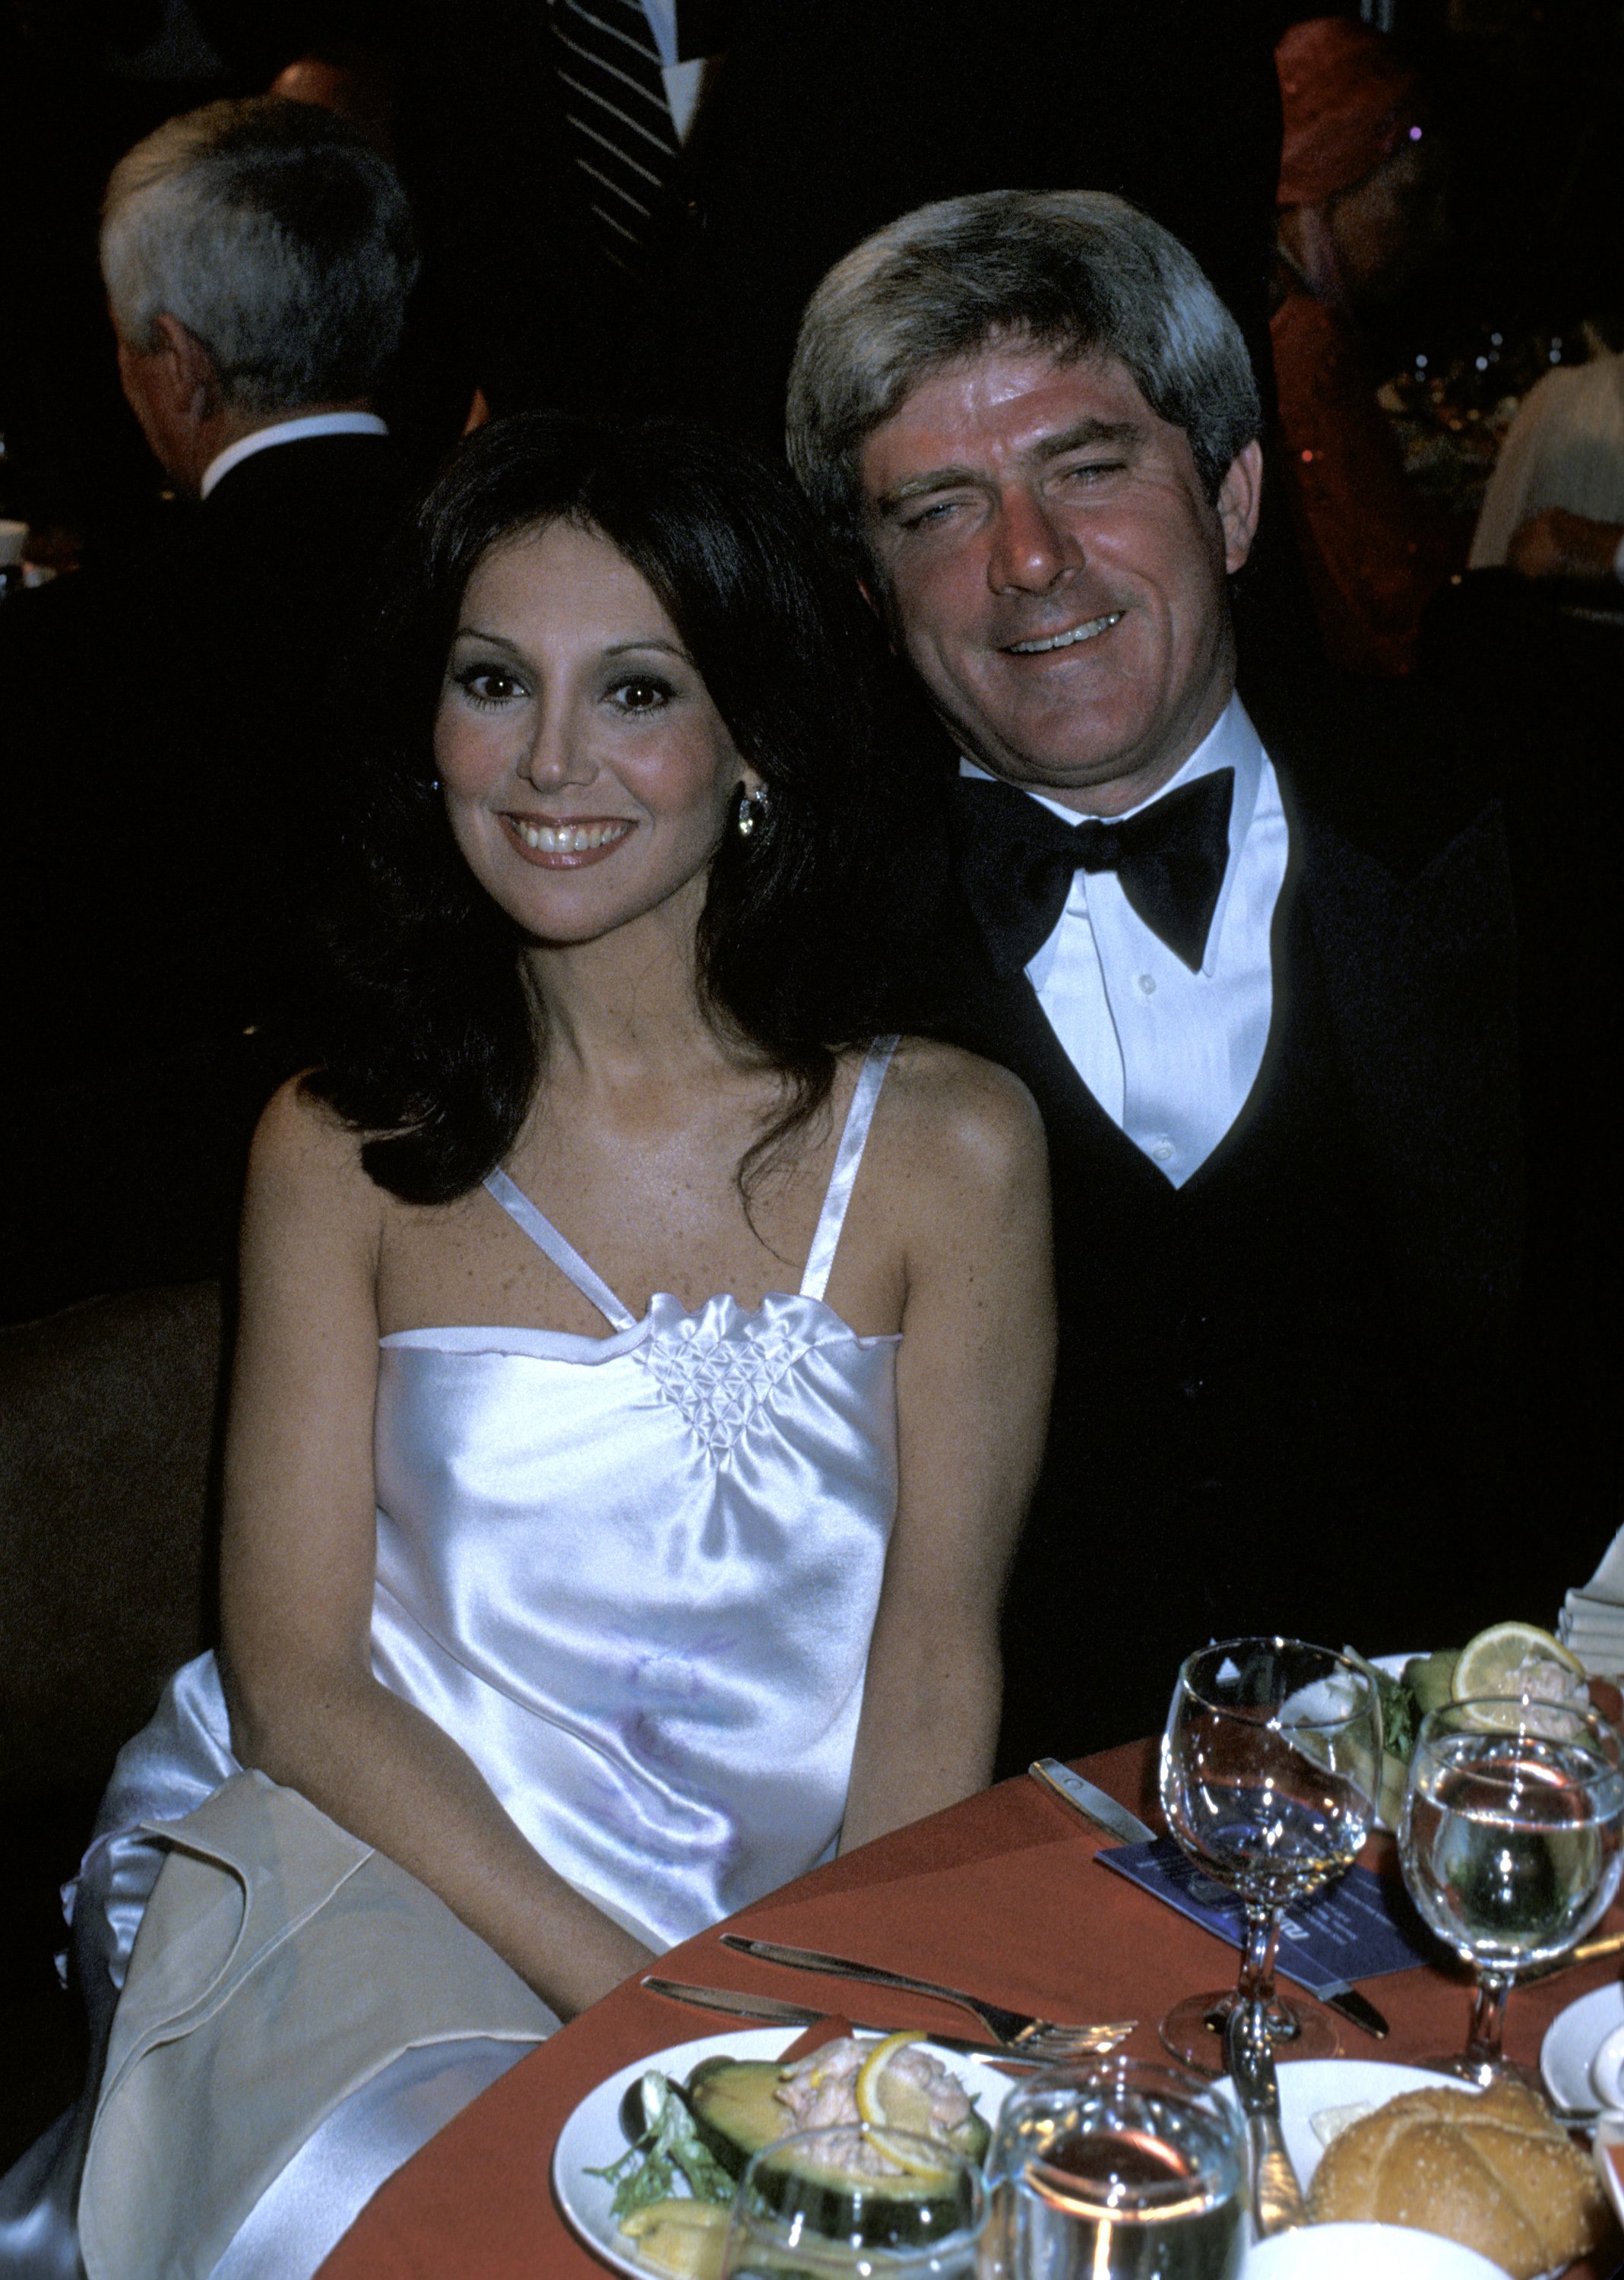 Marlo Thomas and Phil Donahue during Iris Awards Banquet - March 4, 1978 at Bonaventure Hotel in Los Angeles, California, United States | Source: Getty Images